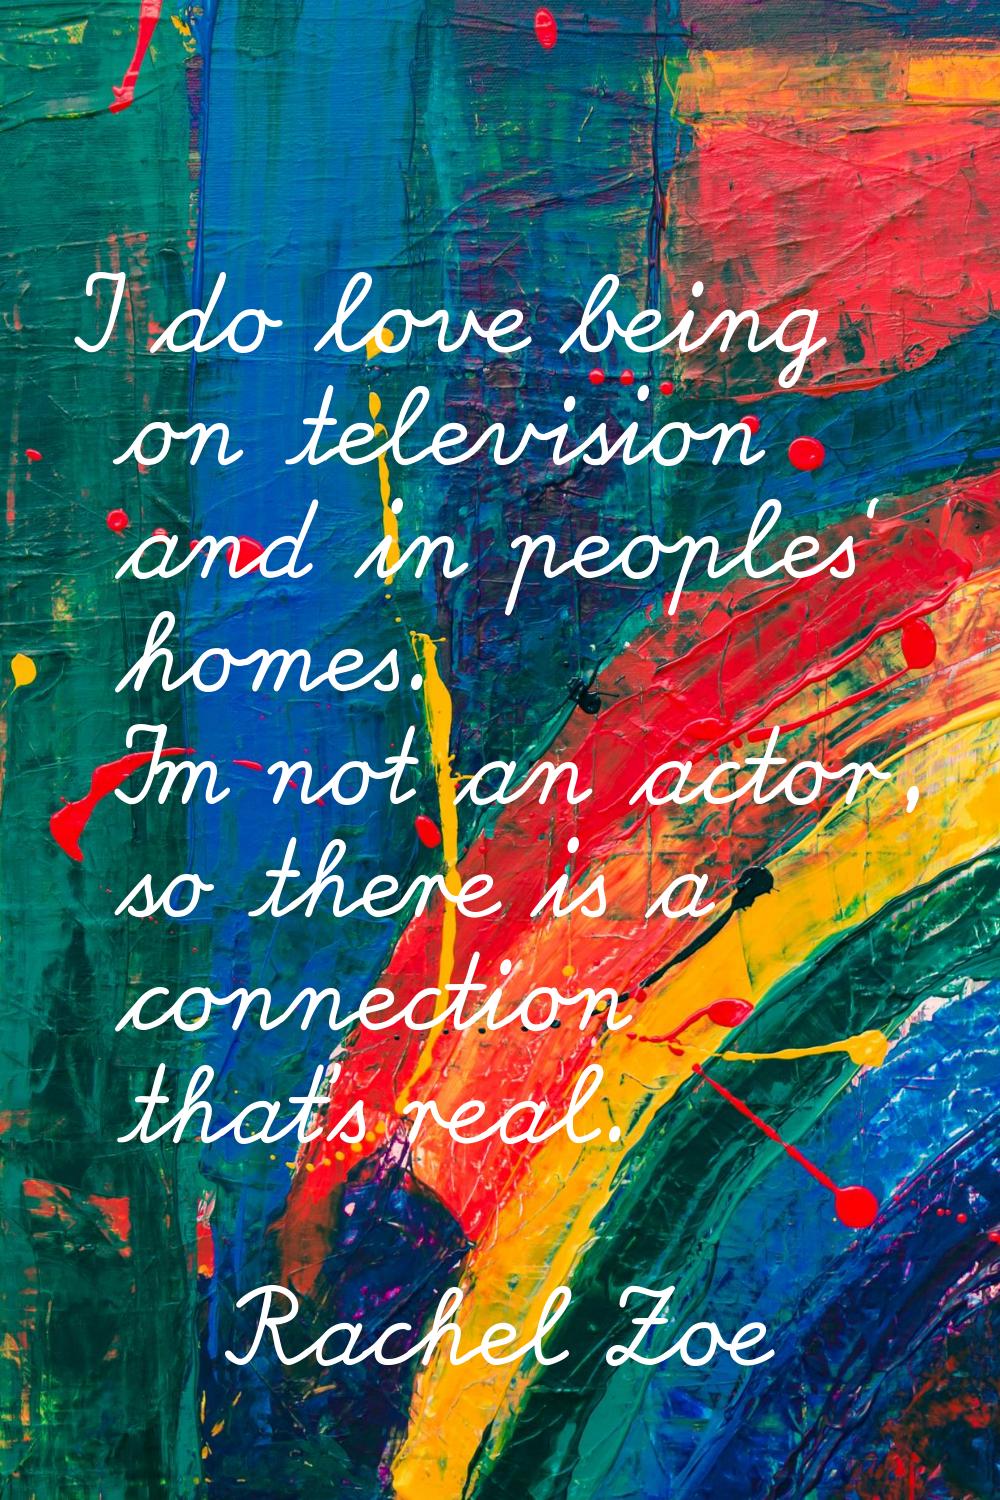 I do love being on television and in peoples' homes. I'm not an actor, so there is a connection tha